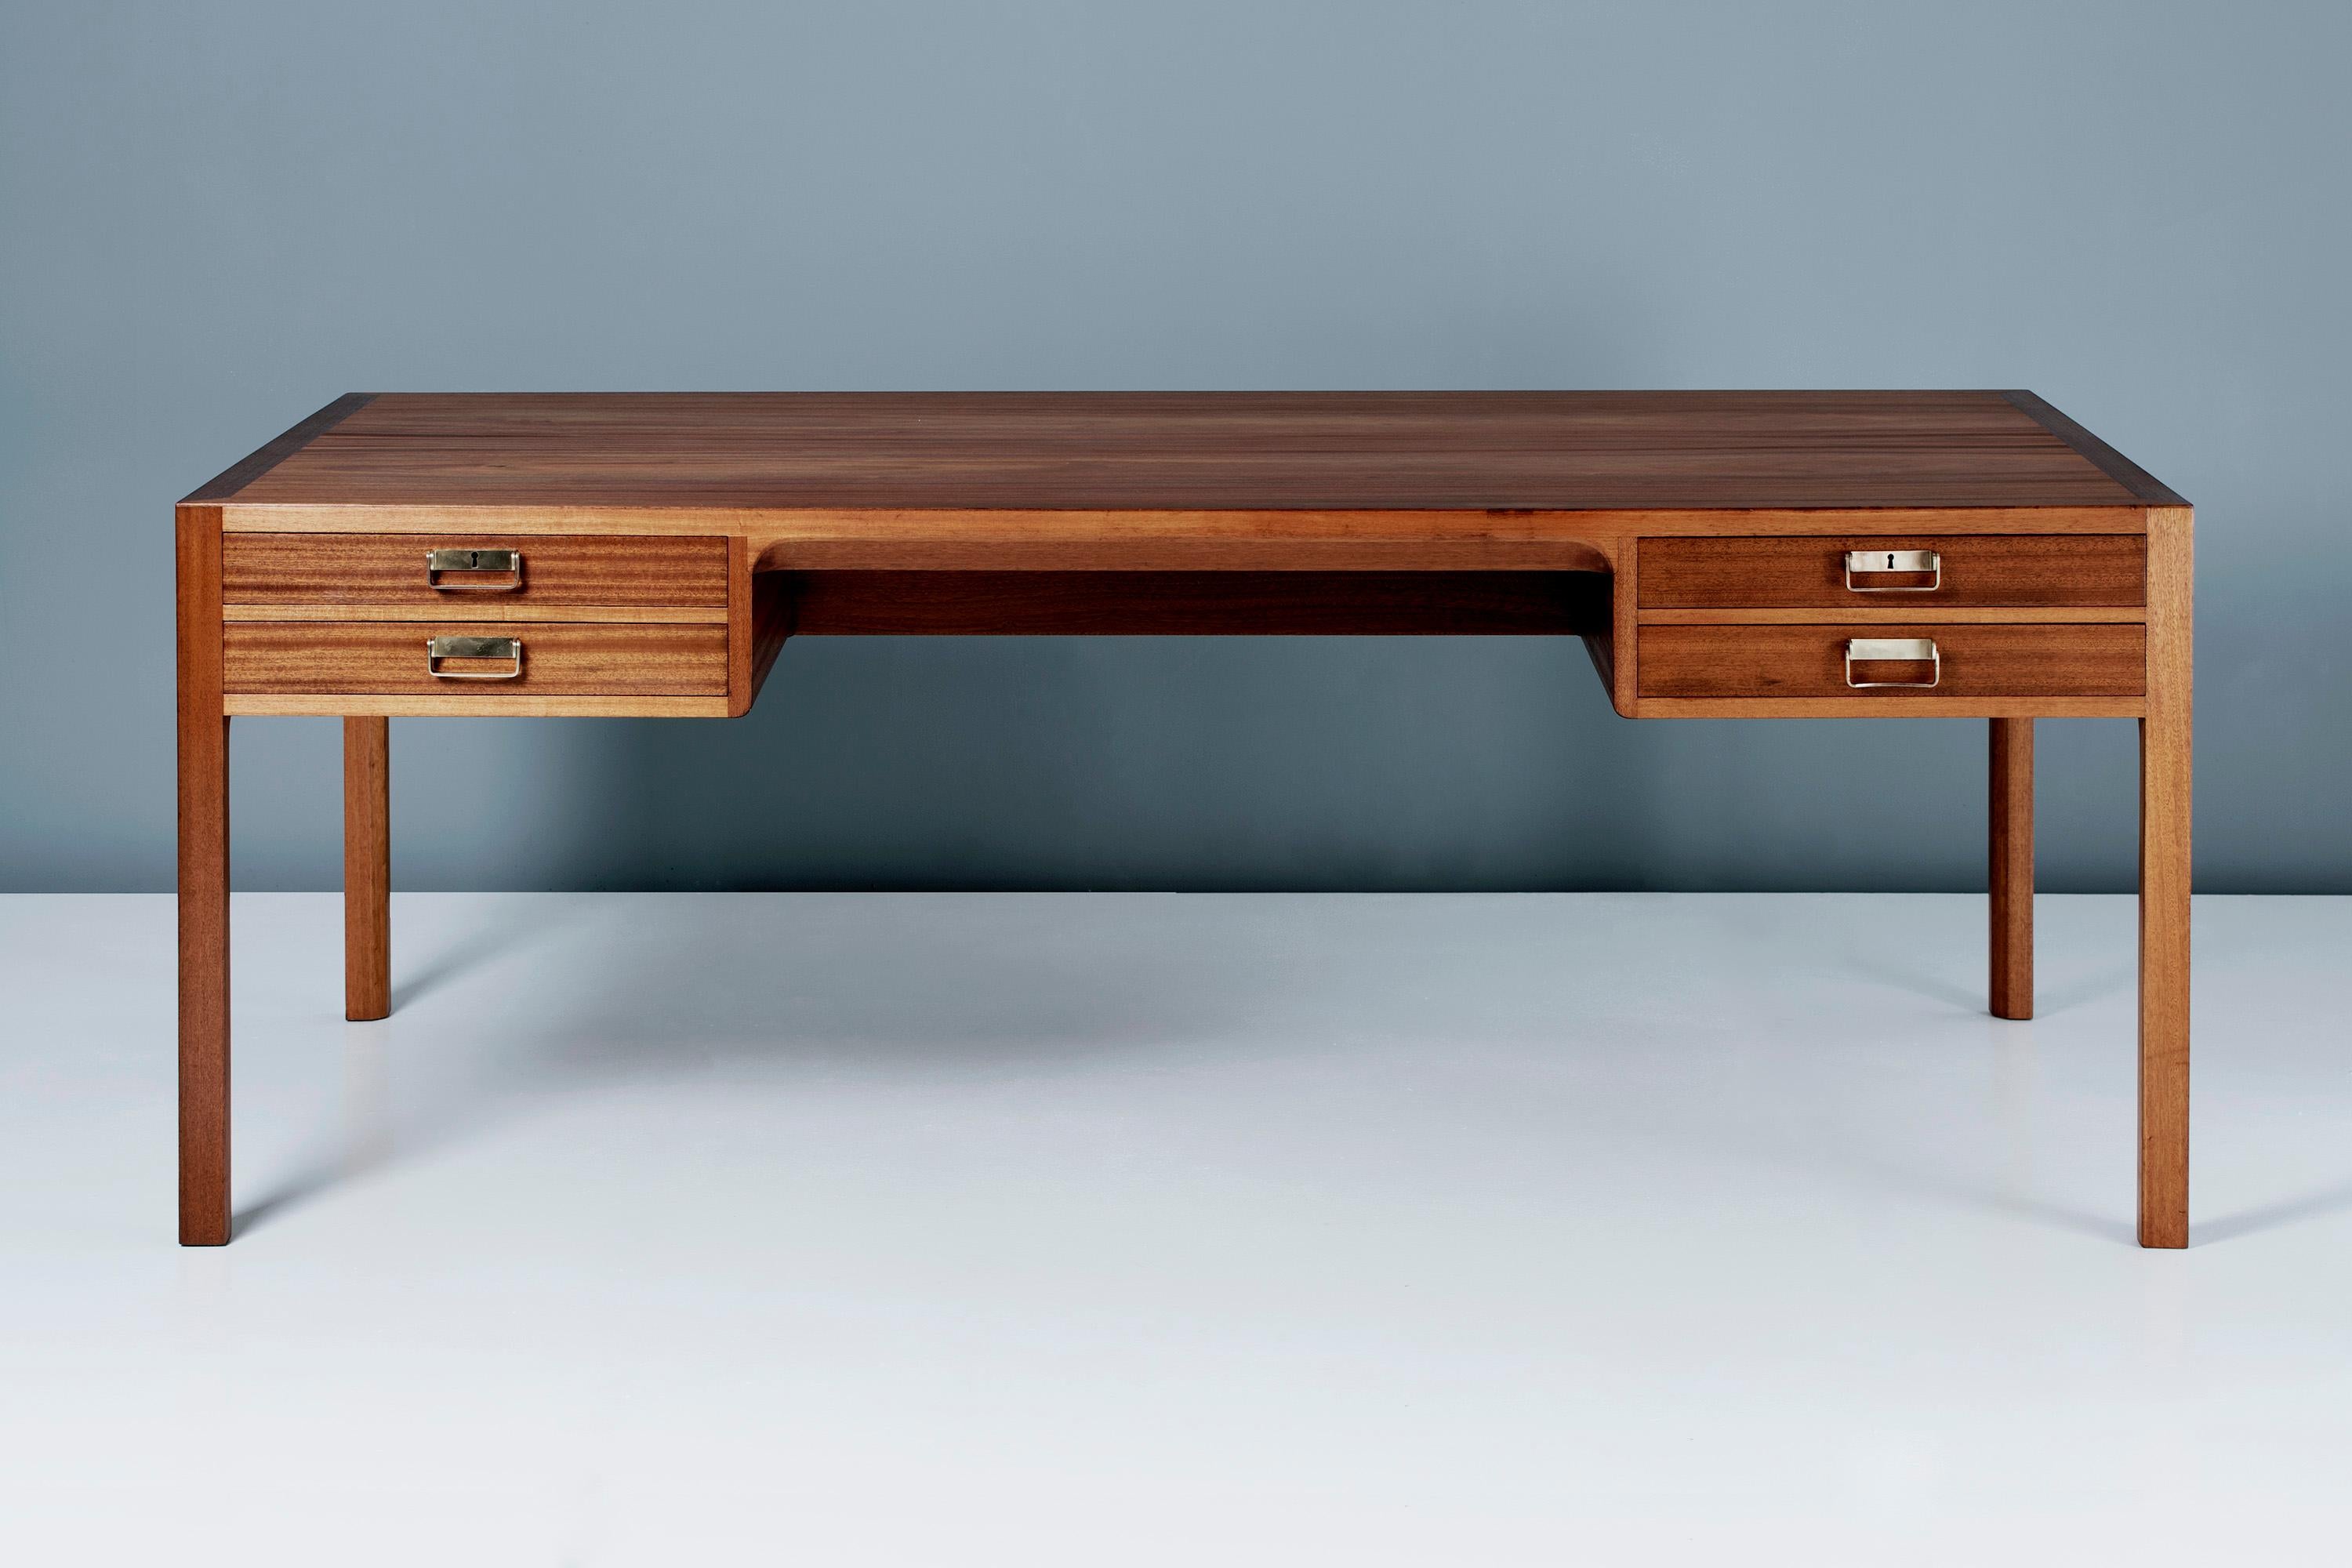 Bernt Petersen

Mahogany Writing Desk, circa 1950s

Four drawer executive desk produced in Denmark by master cabinetmakers Rud. Rasmussen, Denmark. Solid mahogany legs and drawer fronts with veneered top. Solid oak drawer inserts with patinated